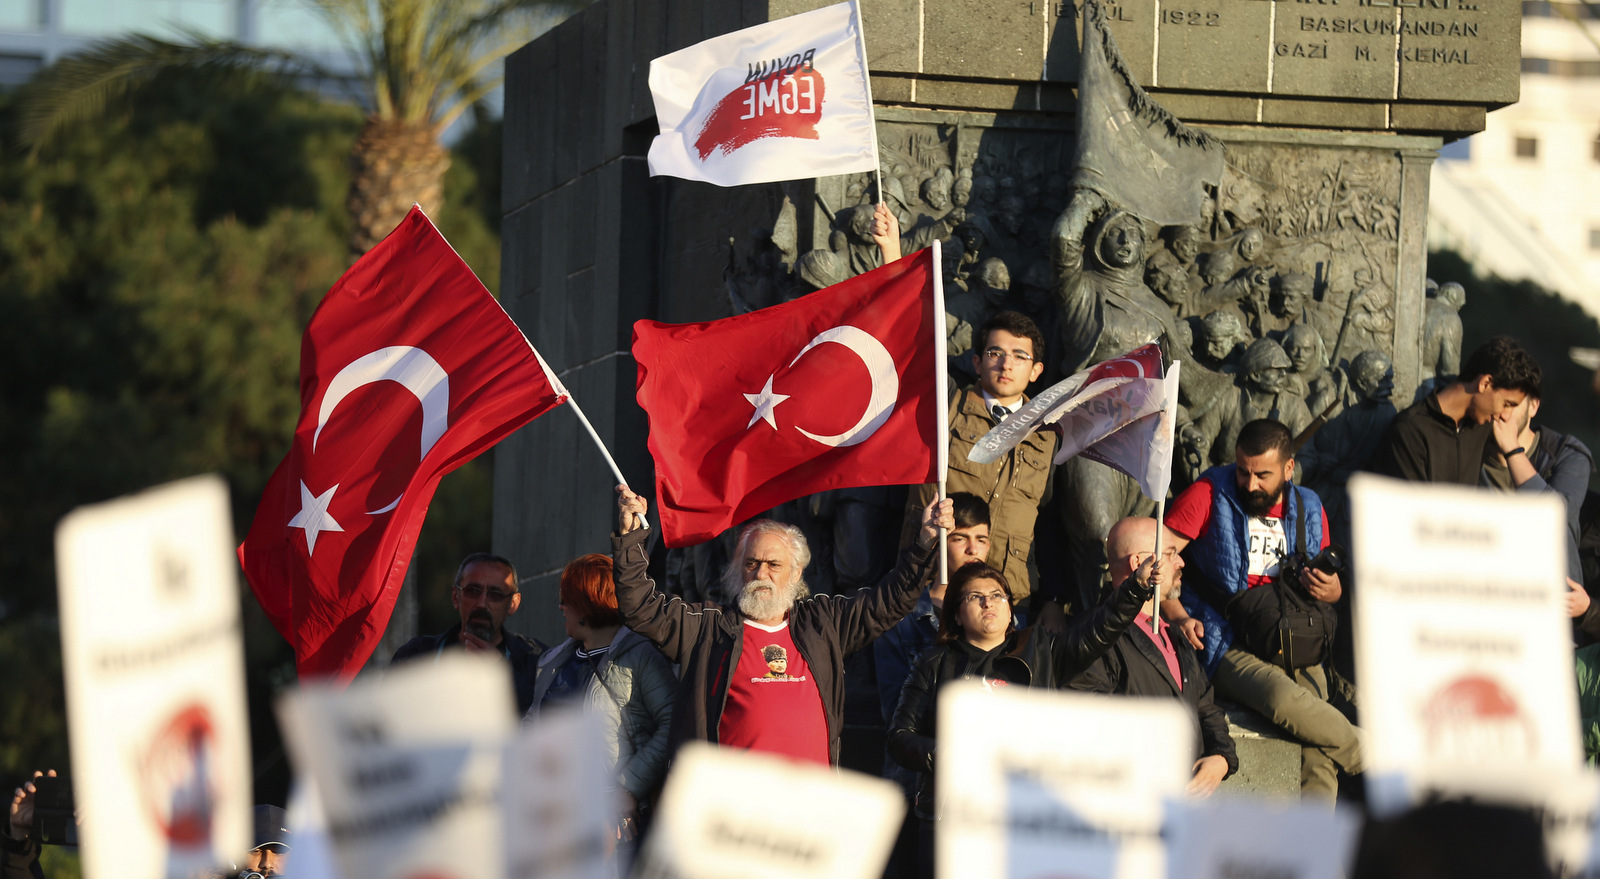 Supporters of the 'no' vote, chant slogans during a protest against the referendum outcome, on the Aegean Sea city of Izmir, Turkey, Tuesday, April 18, 2017. Turkey's main opposition party has filed a formal request seeking Sunday's referendum to be annulled because of voting irregularities. (AP/Emre Tazegul)